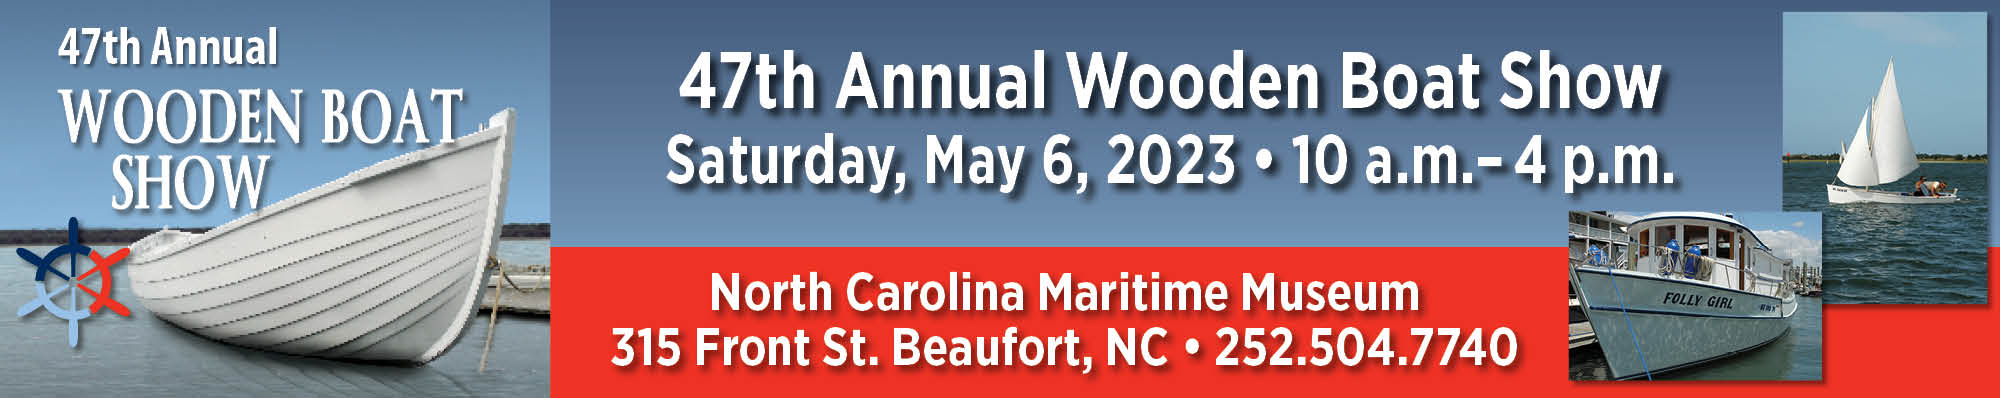 Annual Wooden-Boat-Show-Beaufort-NC-NC_Maritime-Museum